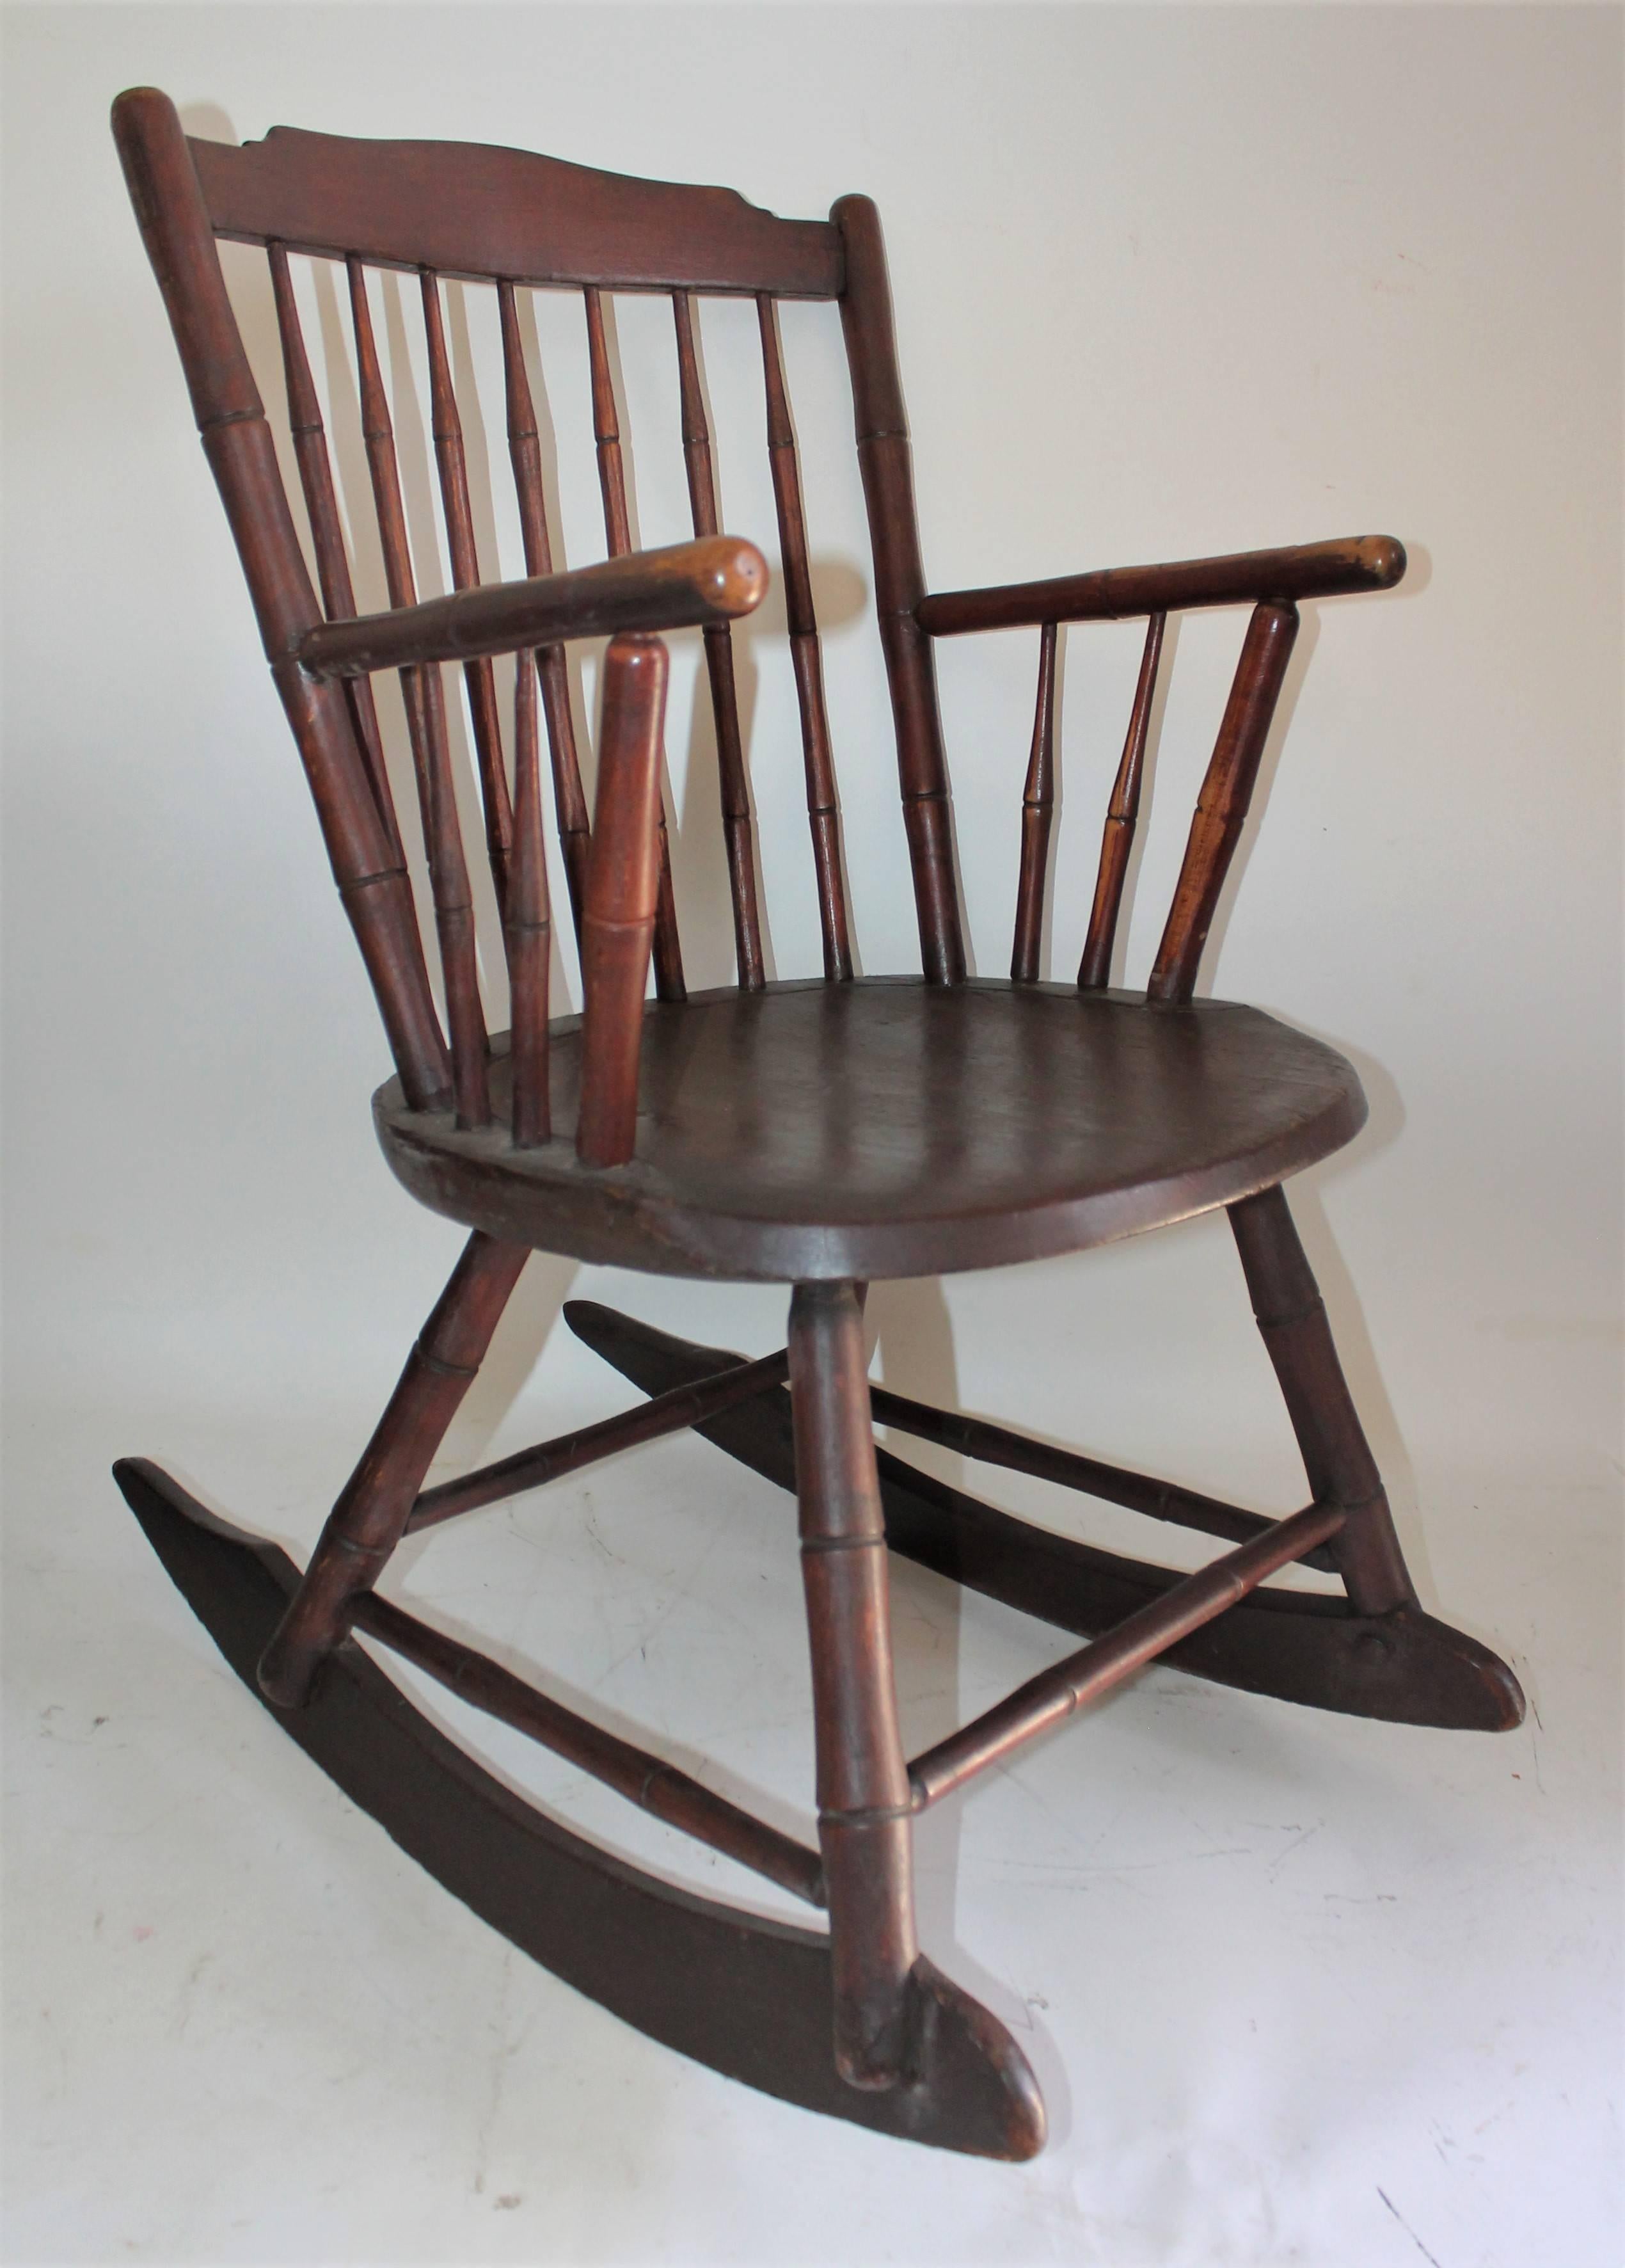 19th century windsor rocking chair in fine condition. This is a very sturdy rocking chair. Minor little old repairs. It has a wide seat and back. This rocking chair has a wonderful aged patina.